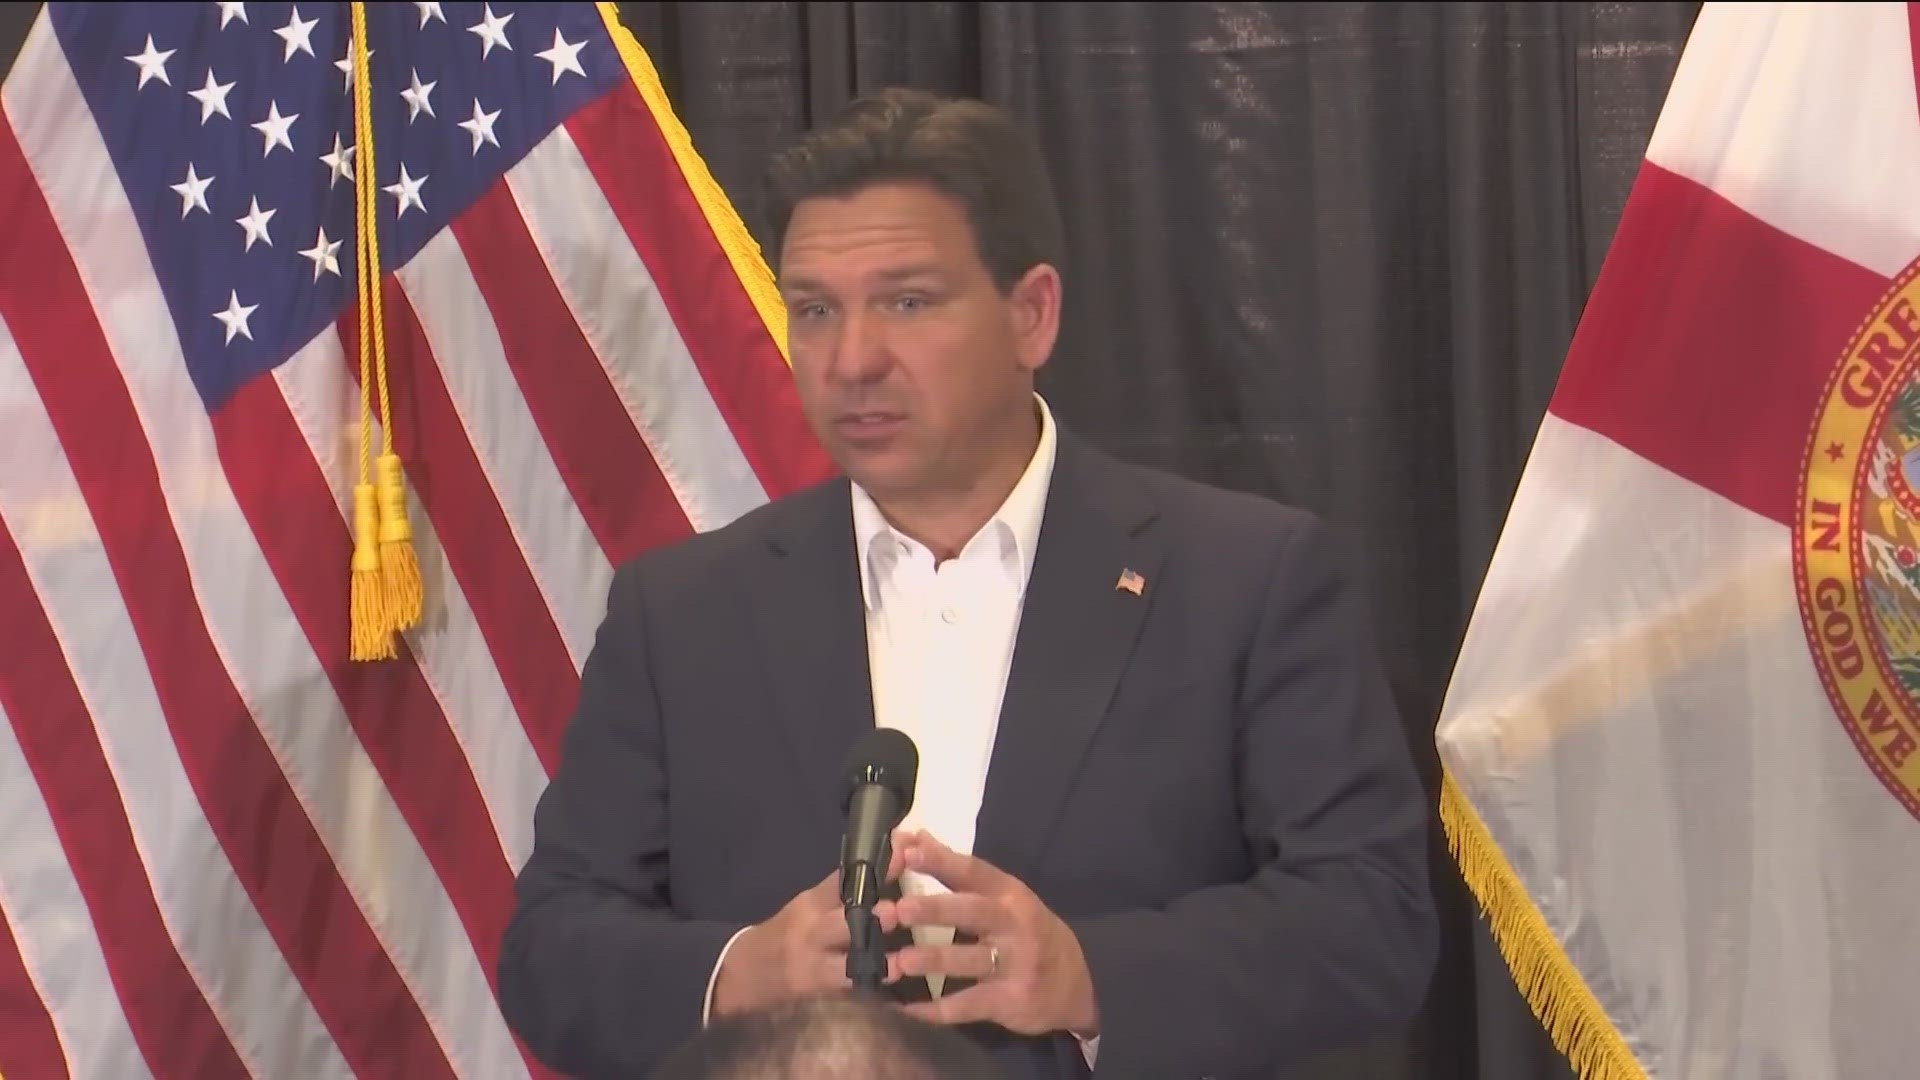 DeSantis said he hopes the new laws will attract and keep healthcare workers in the state.